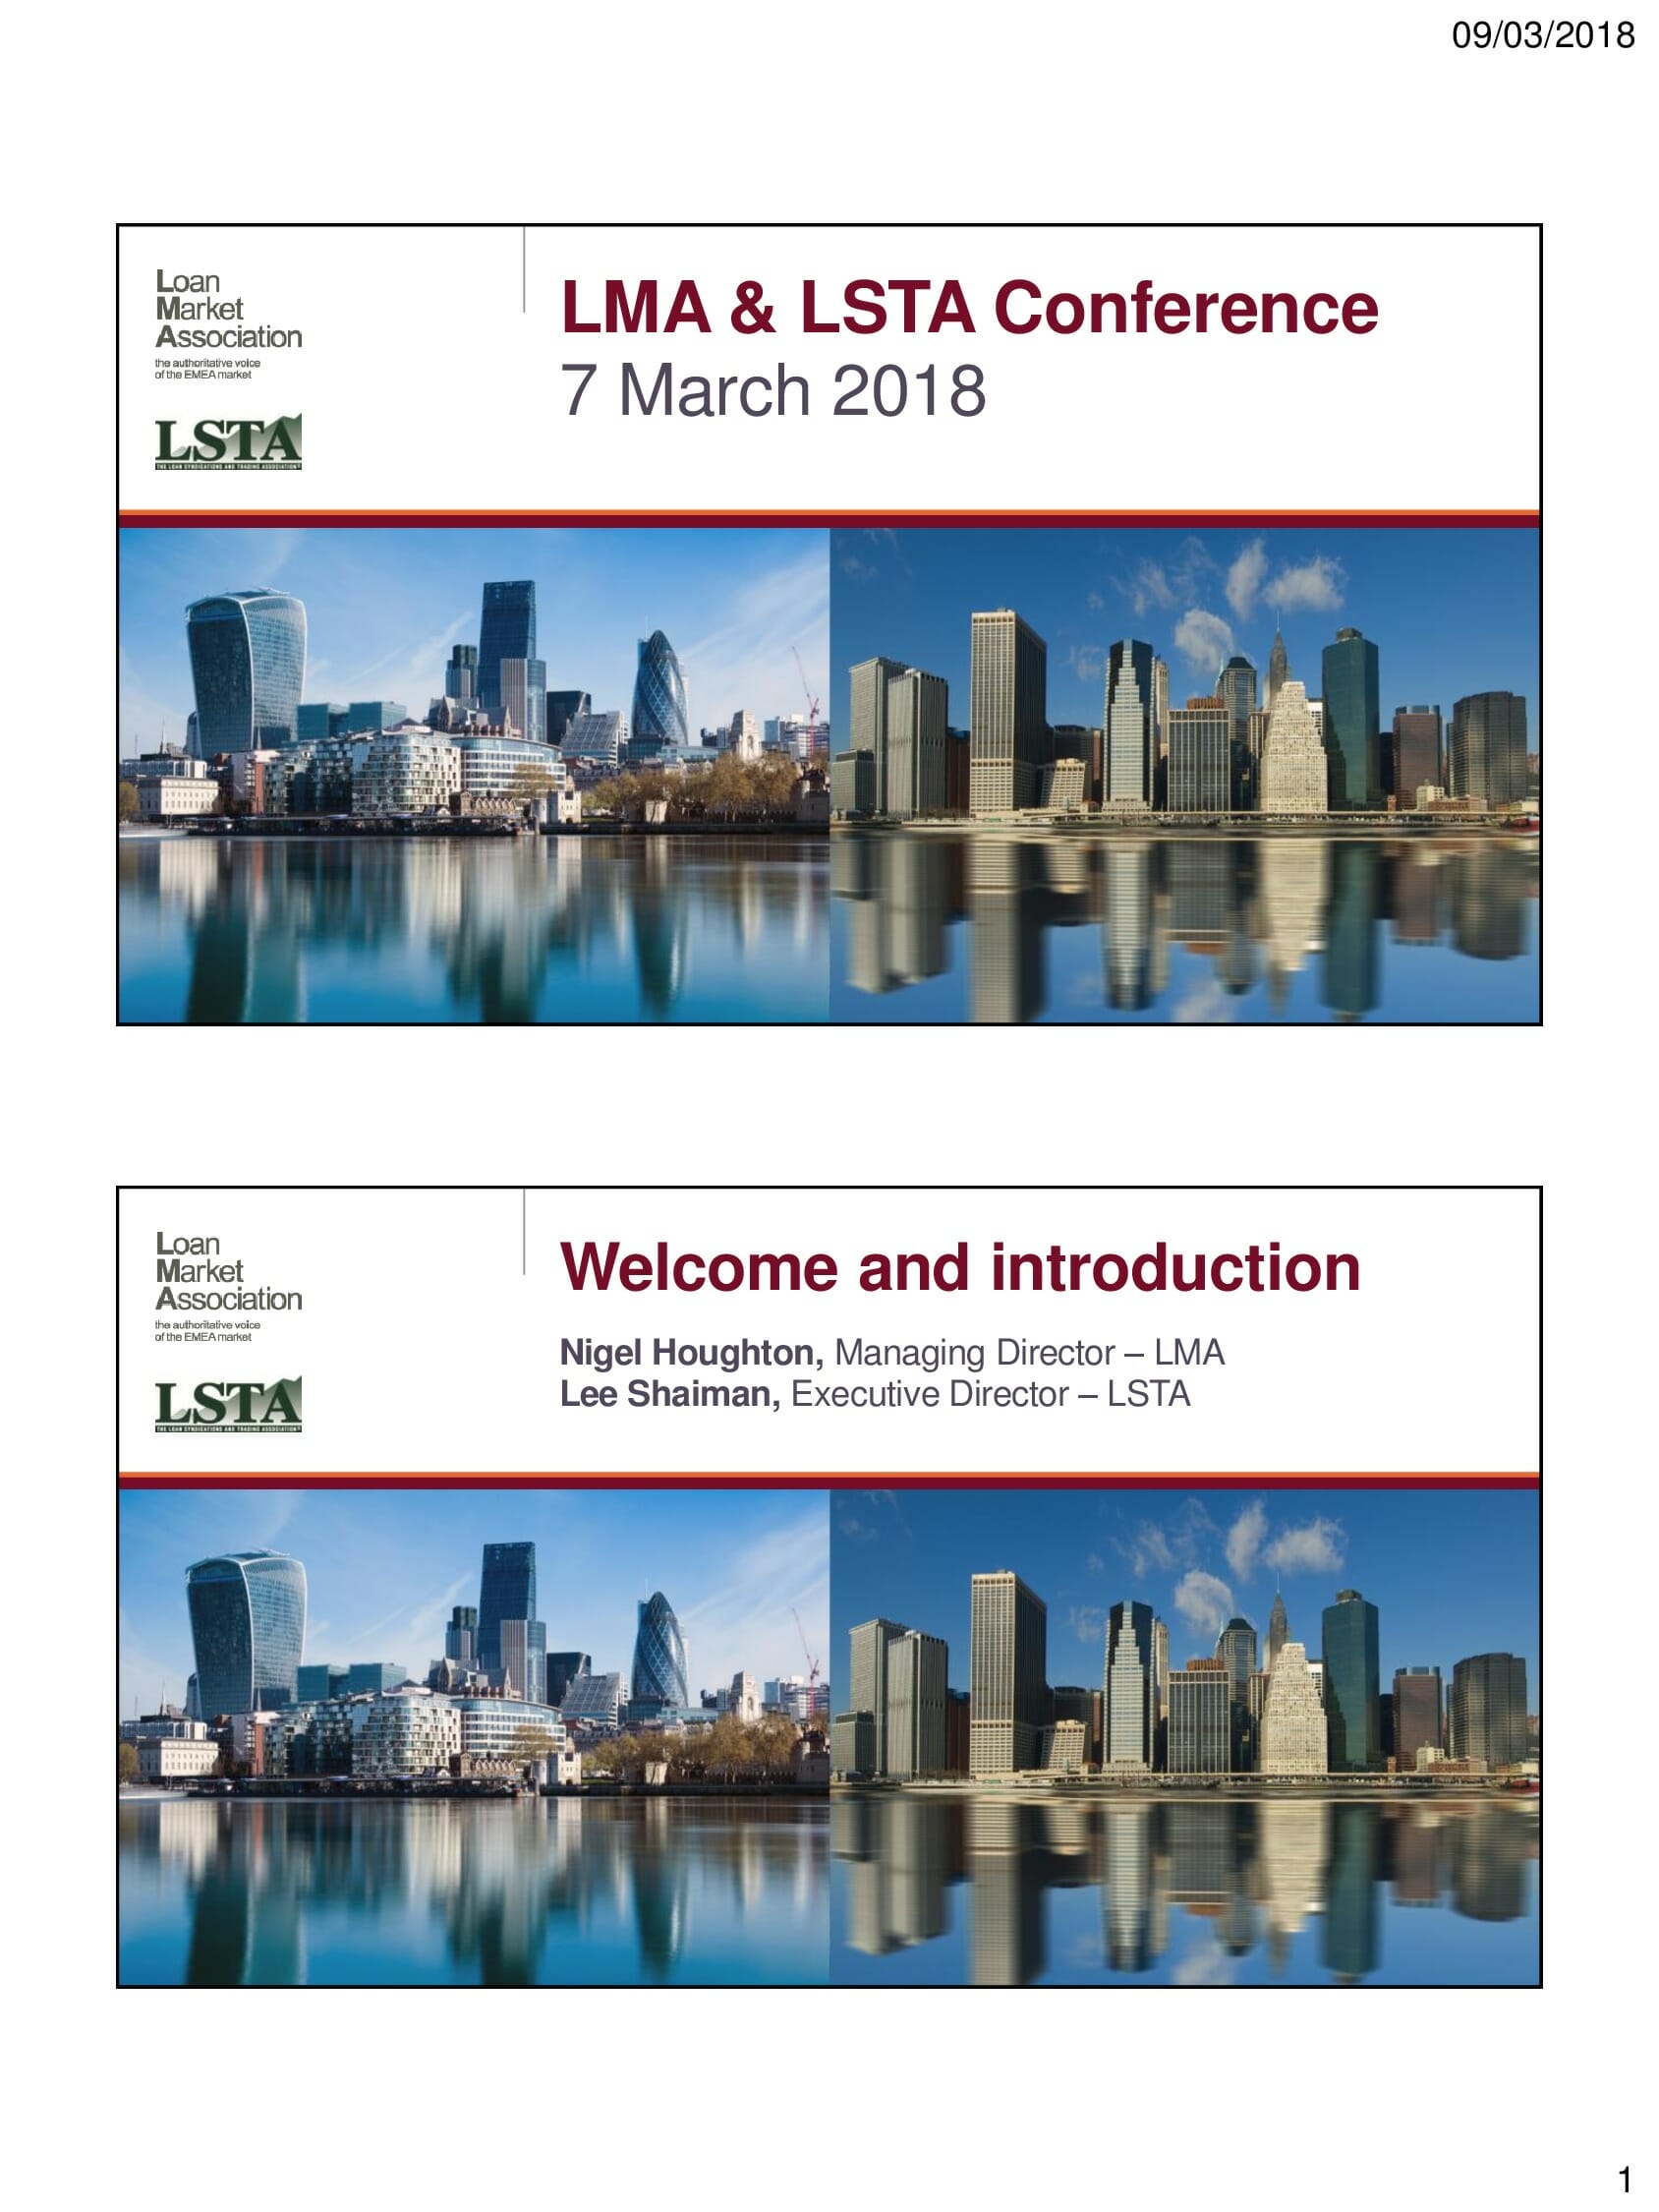 LSTA and LMA Joint Conference London LSTA